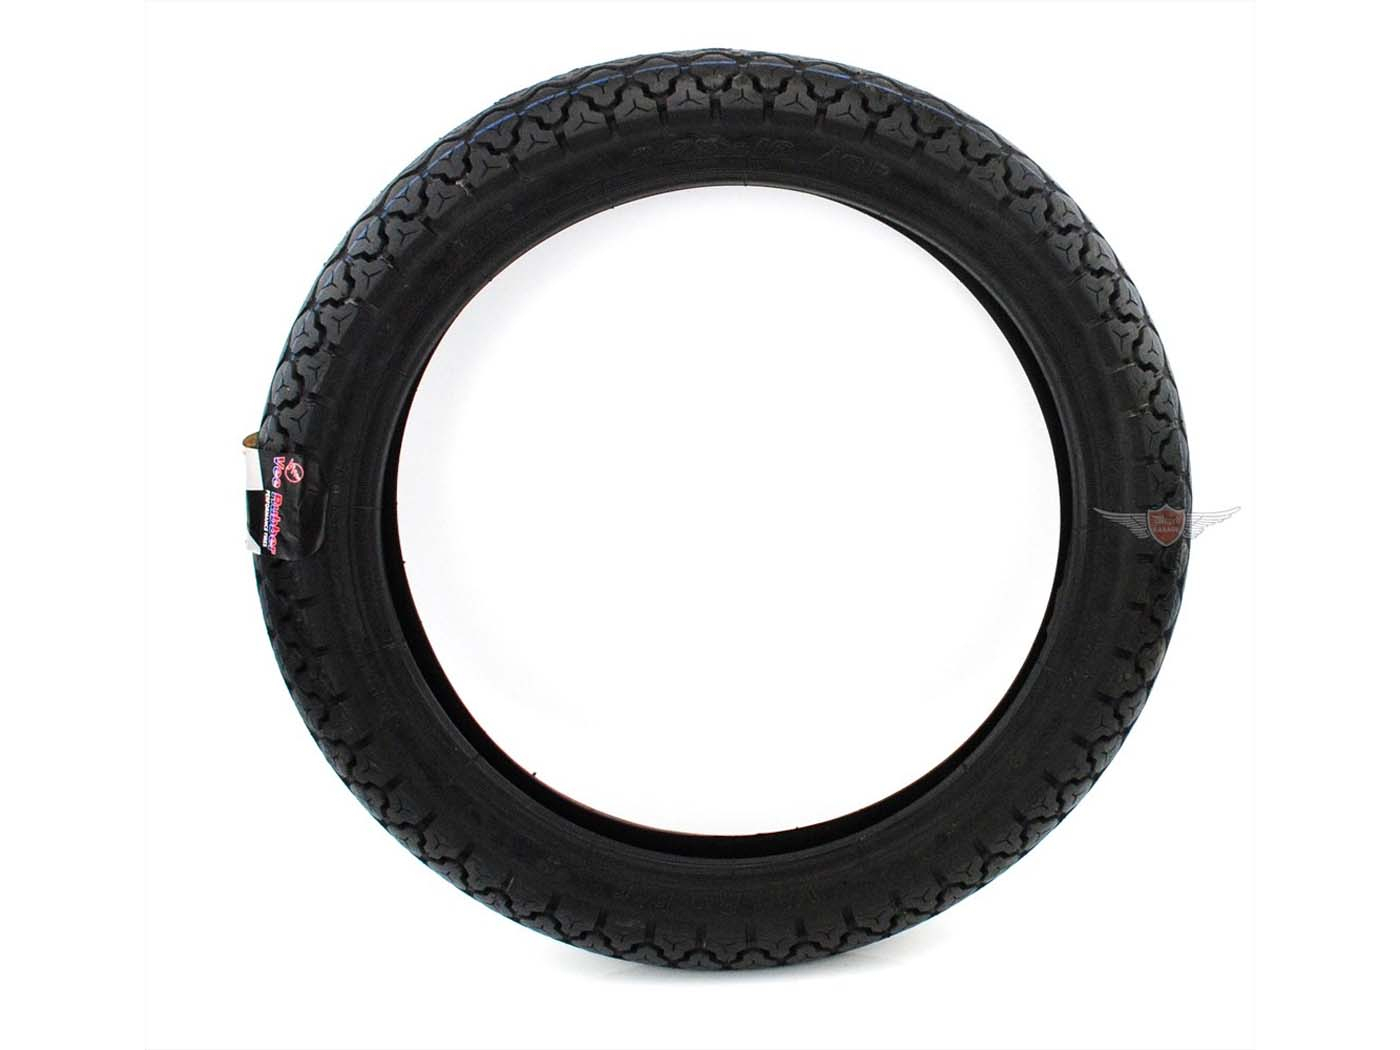 Vee Rubber 2.75 X 16 Inch Classic Tires